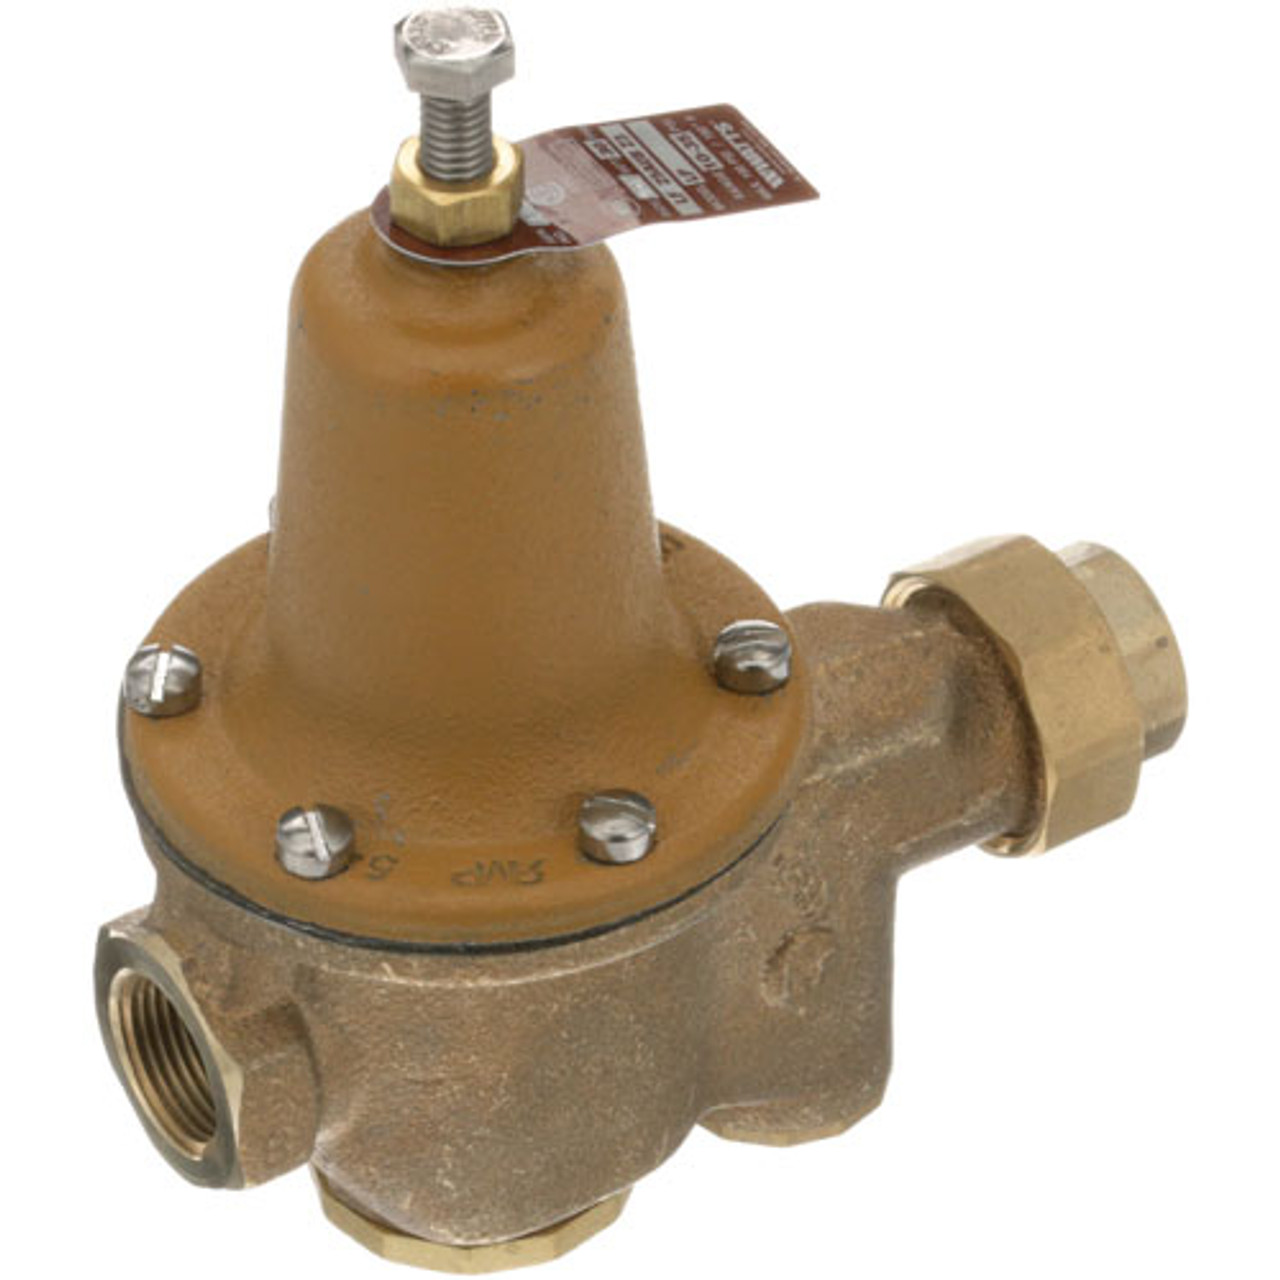 Pressure Reducing Valve 3/4" - Replacement Part For Hobart 998223